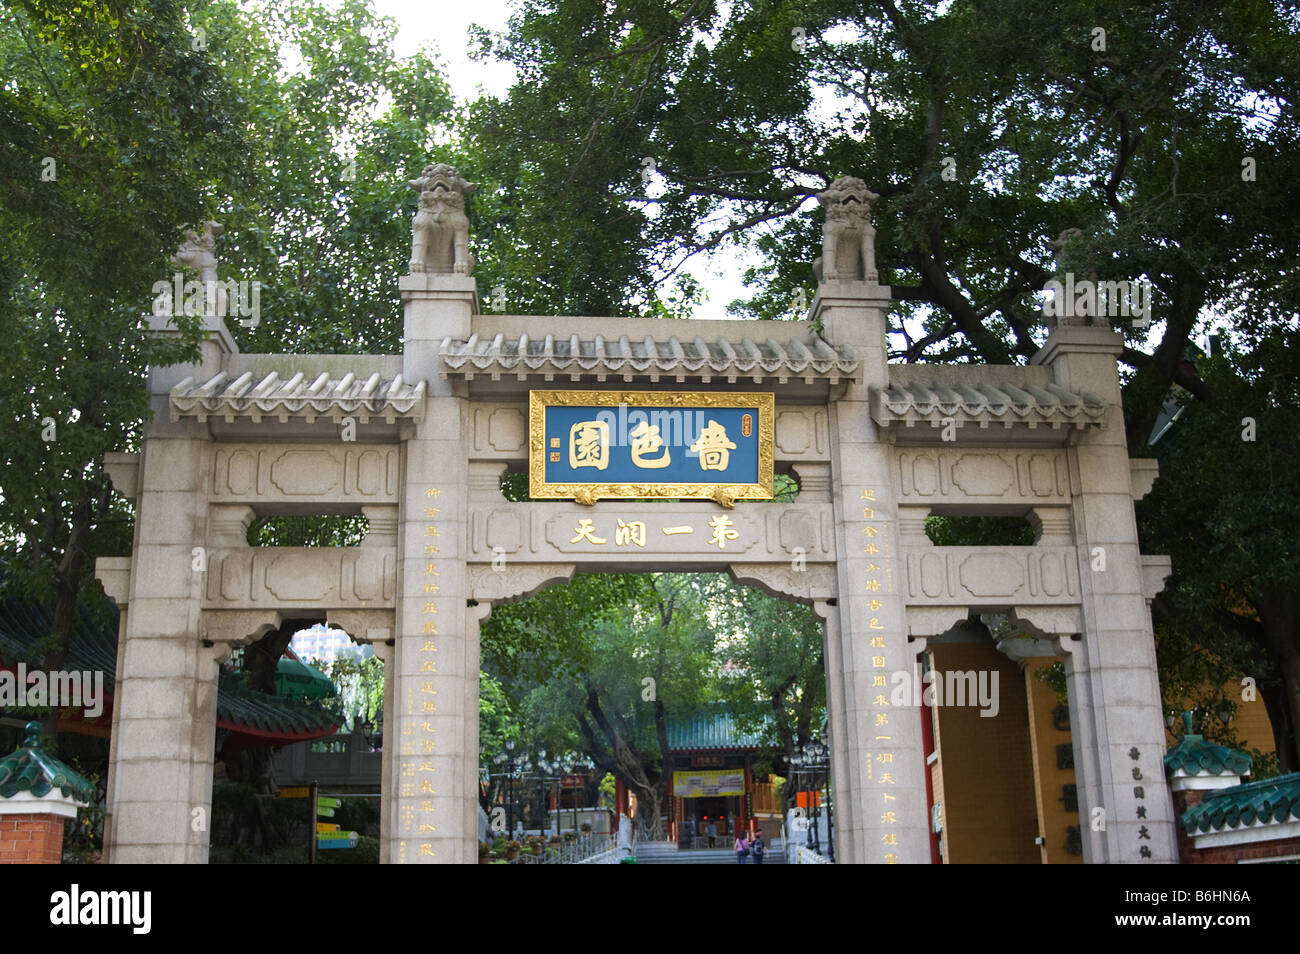 Entrance to Sik Sik Yuen also known as Wong Tai Sin Temple Kowloon Hong Kong Stock Photo